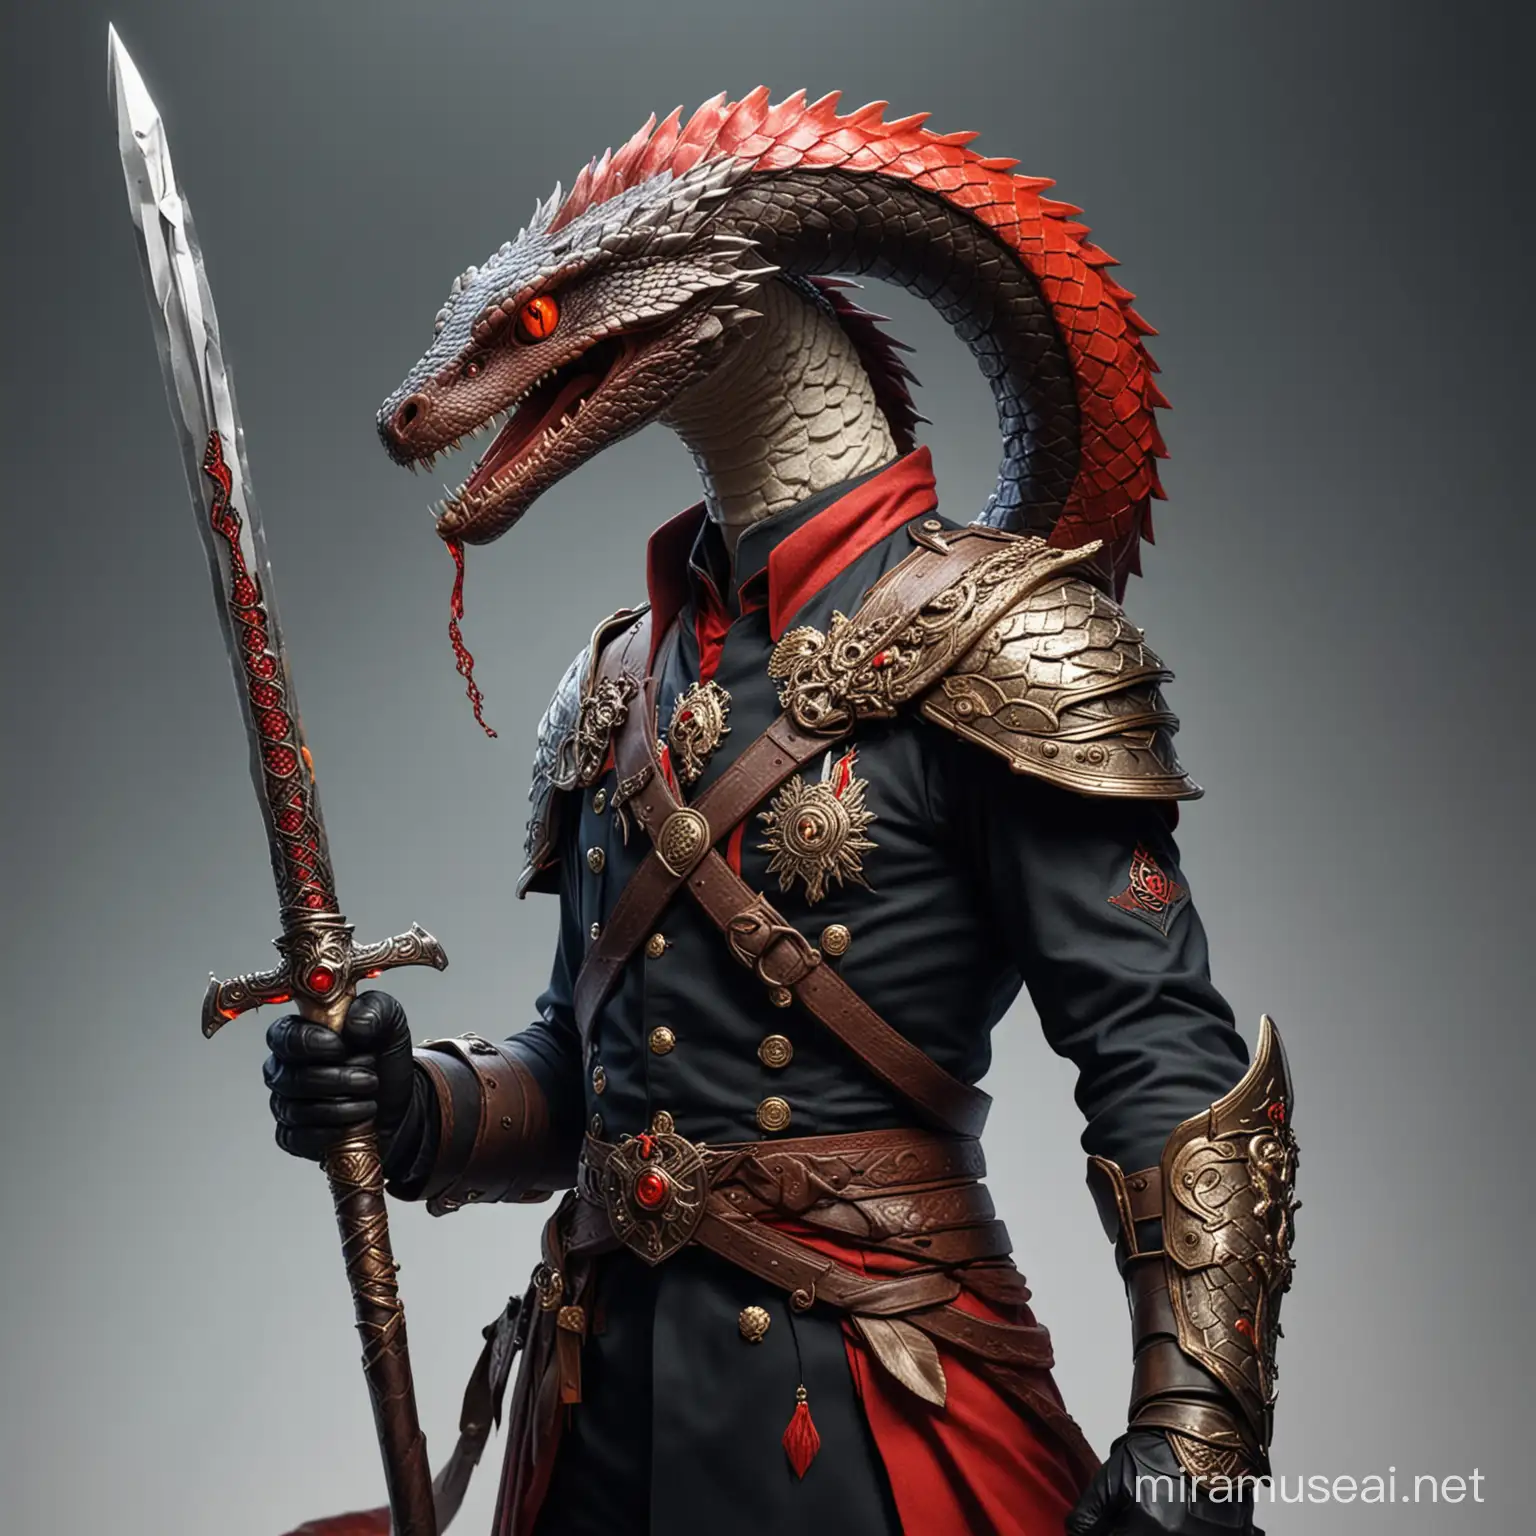 human, snake head, snake tail, red scales, long snout, magic sword with a organe eye on the hilt, military uniform.